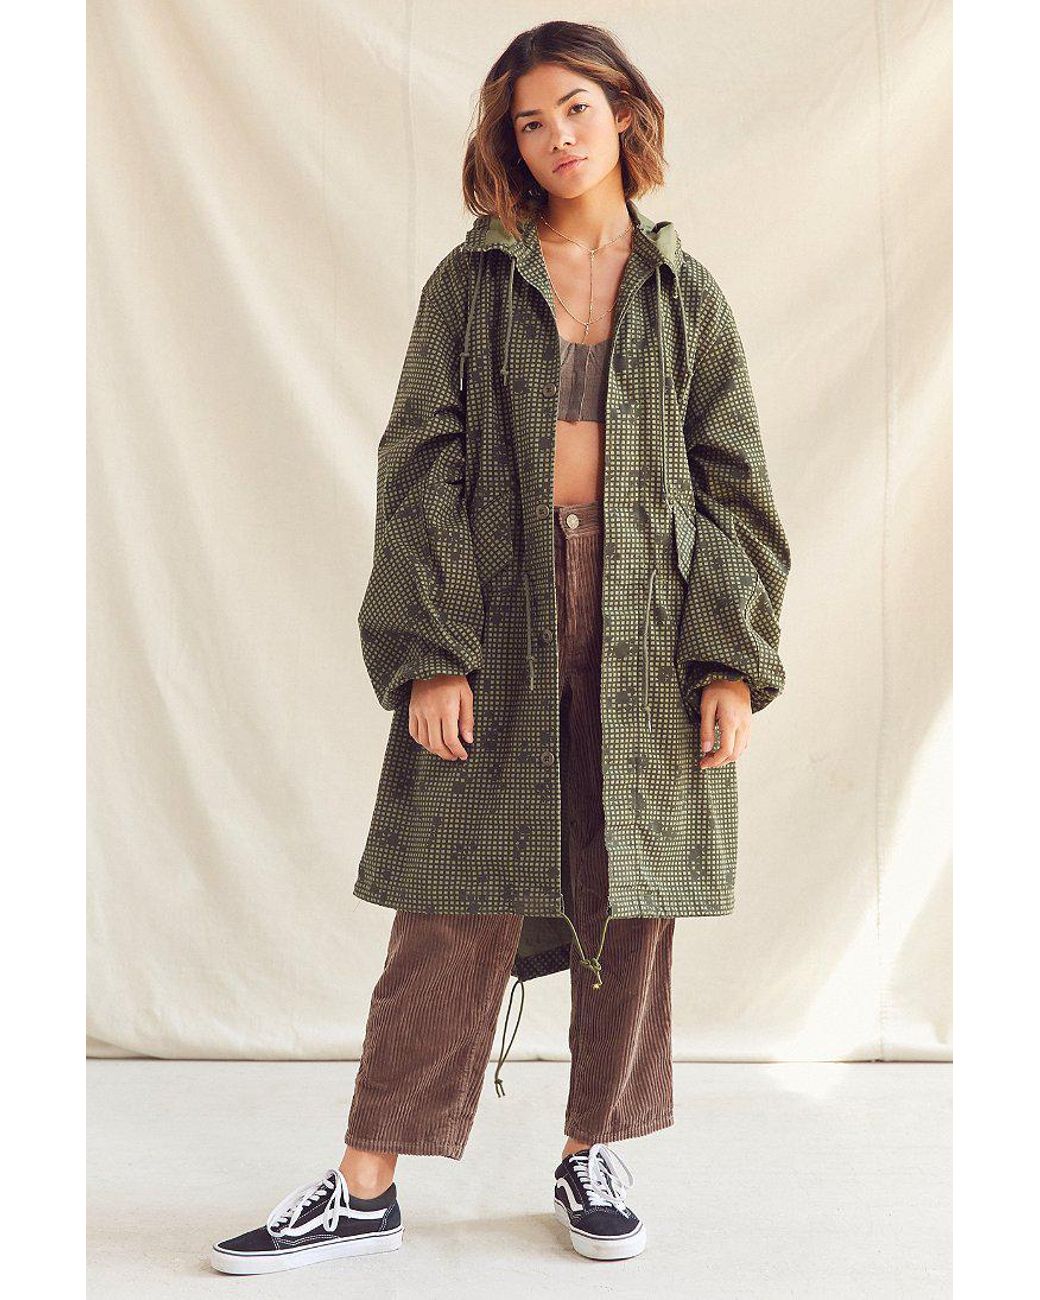 Urban Outfitters Vintage Night Desert Camo Parka Jacket in Green | Lyst